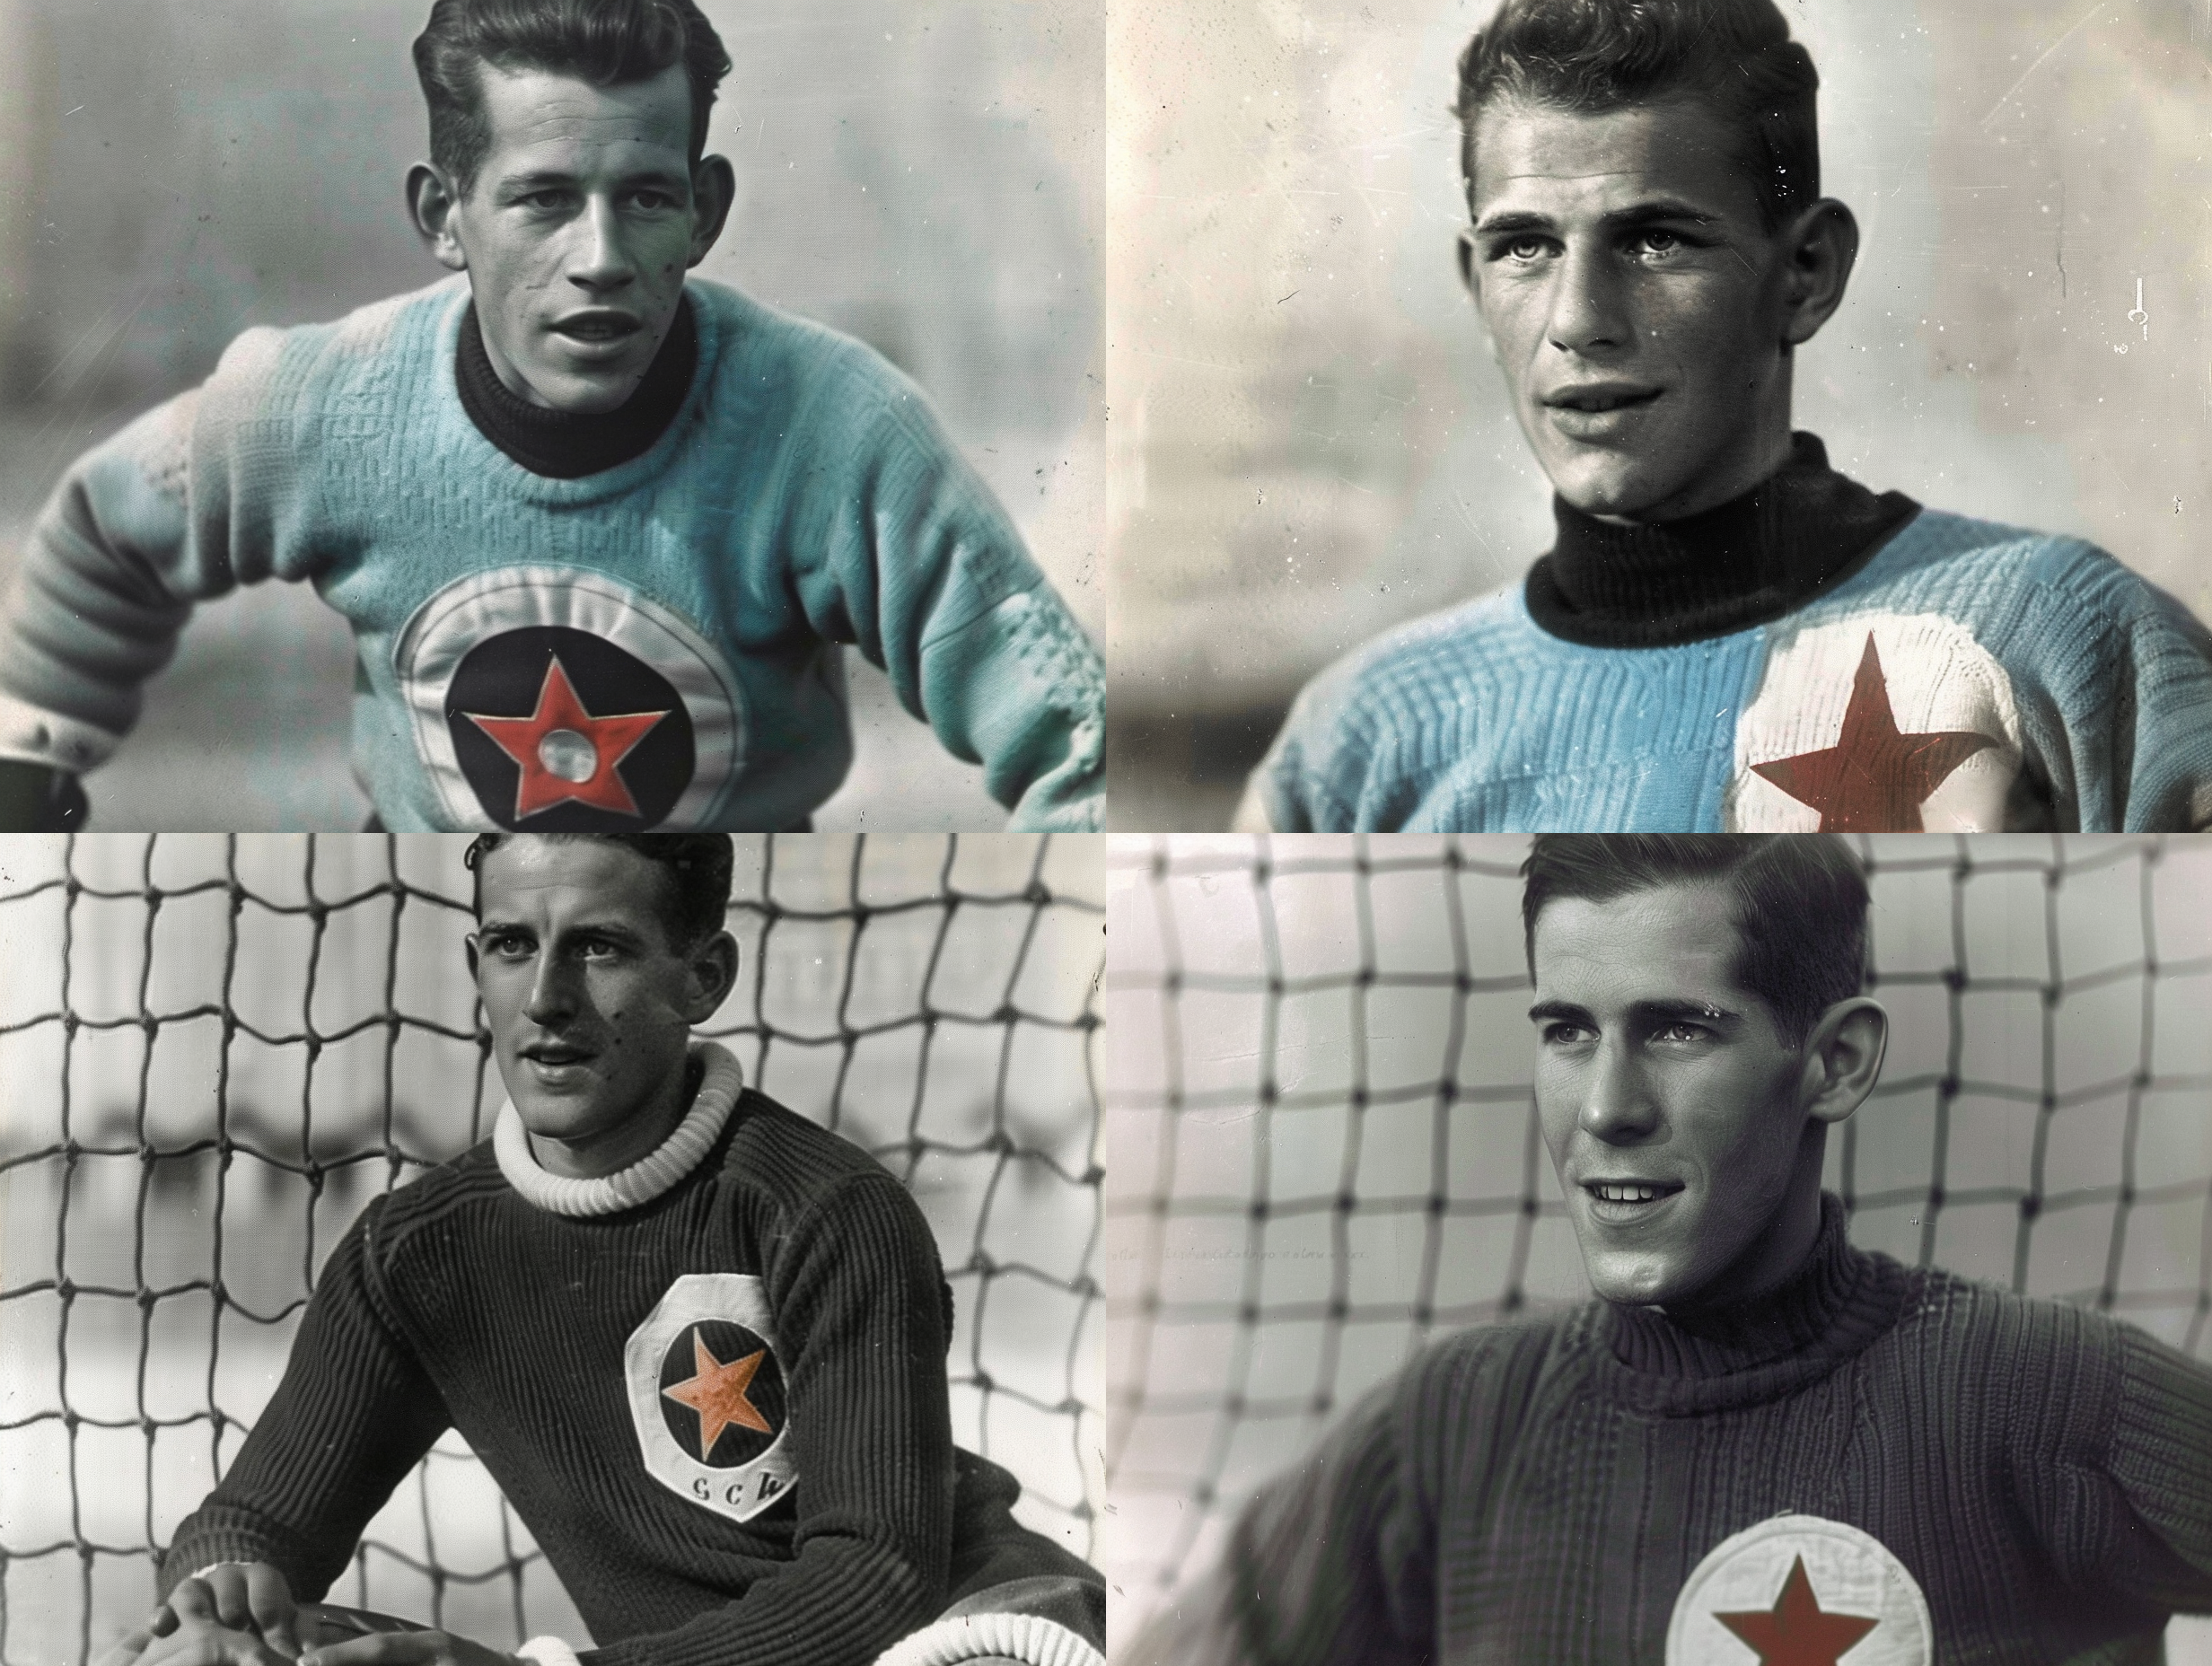 Colorize Photo on this URL https://en.slavia.cz/img/historie/hraci/planicka.jpg 
There is footbal goalkeeper in sweather. The color of sweather is light blue, he has a white circle on his chest and a red star in it.